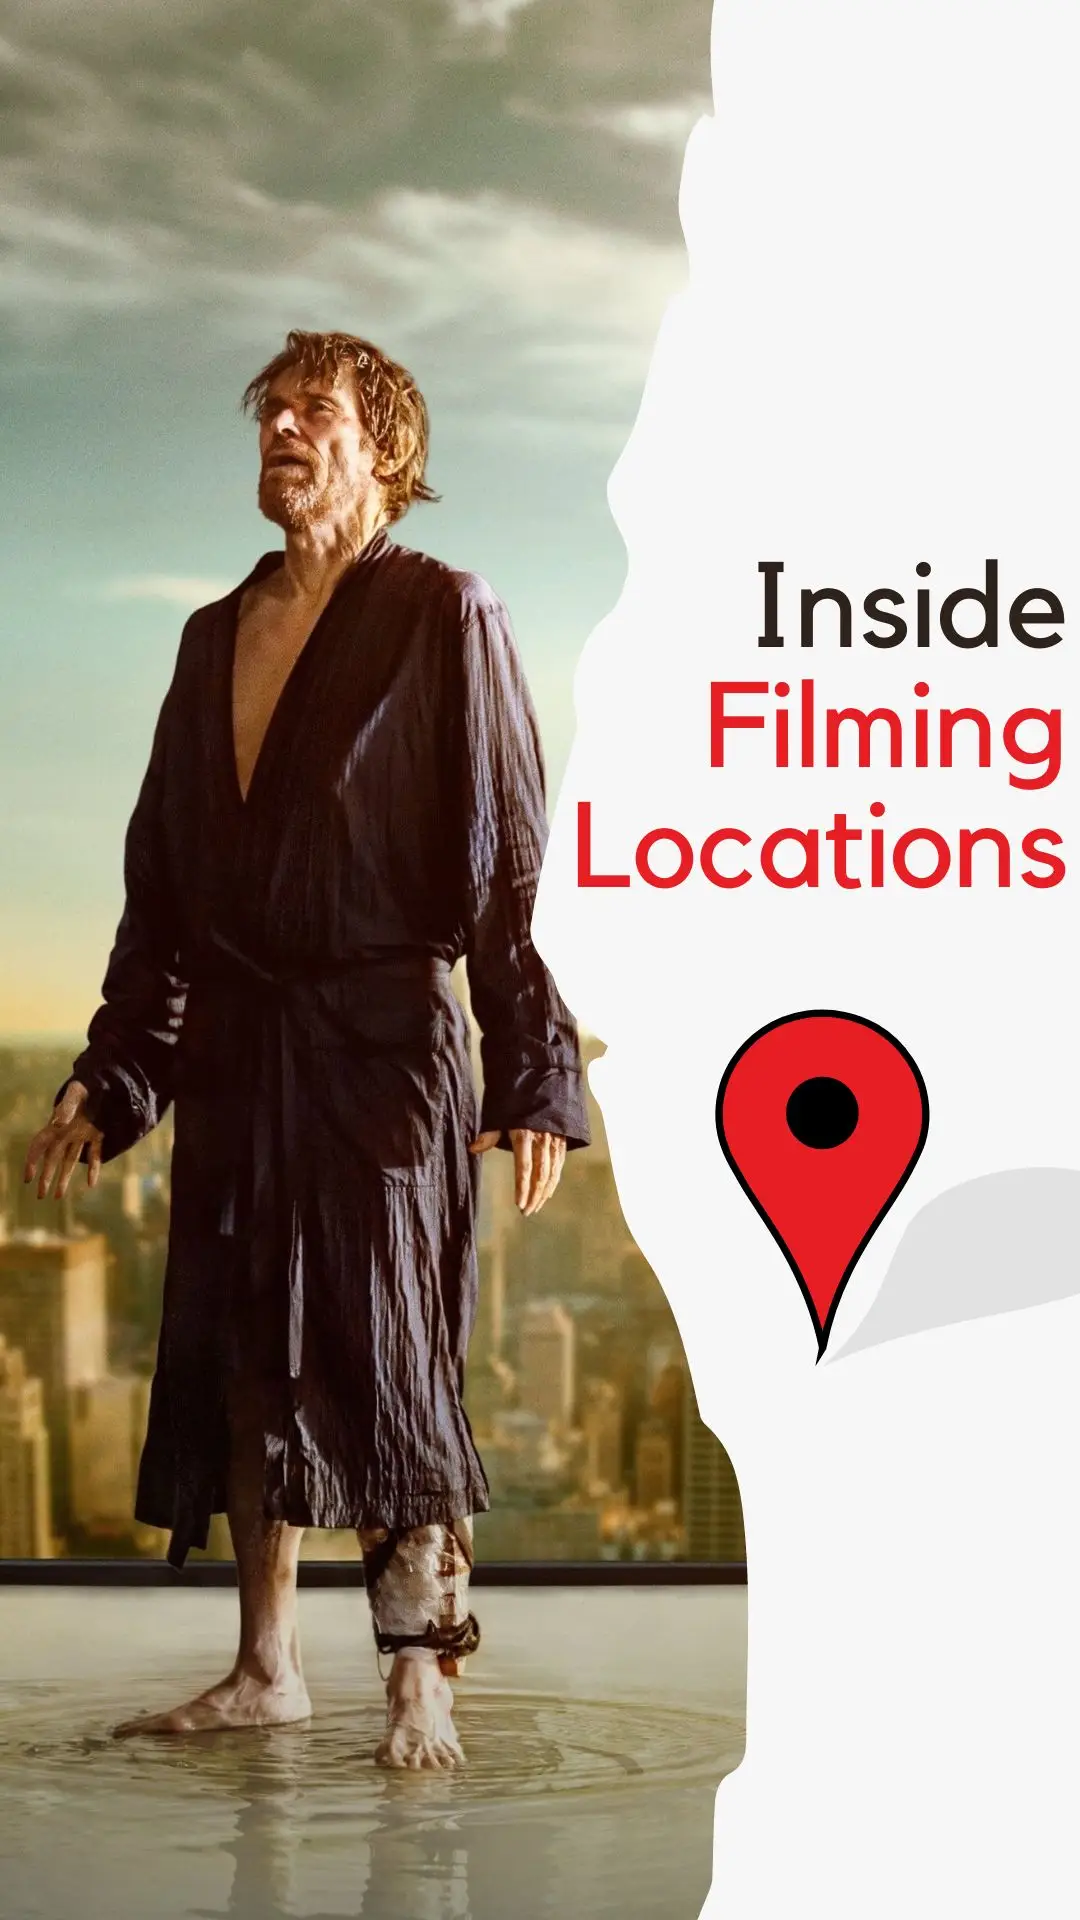 Inside Filming Locations